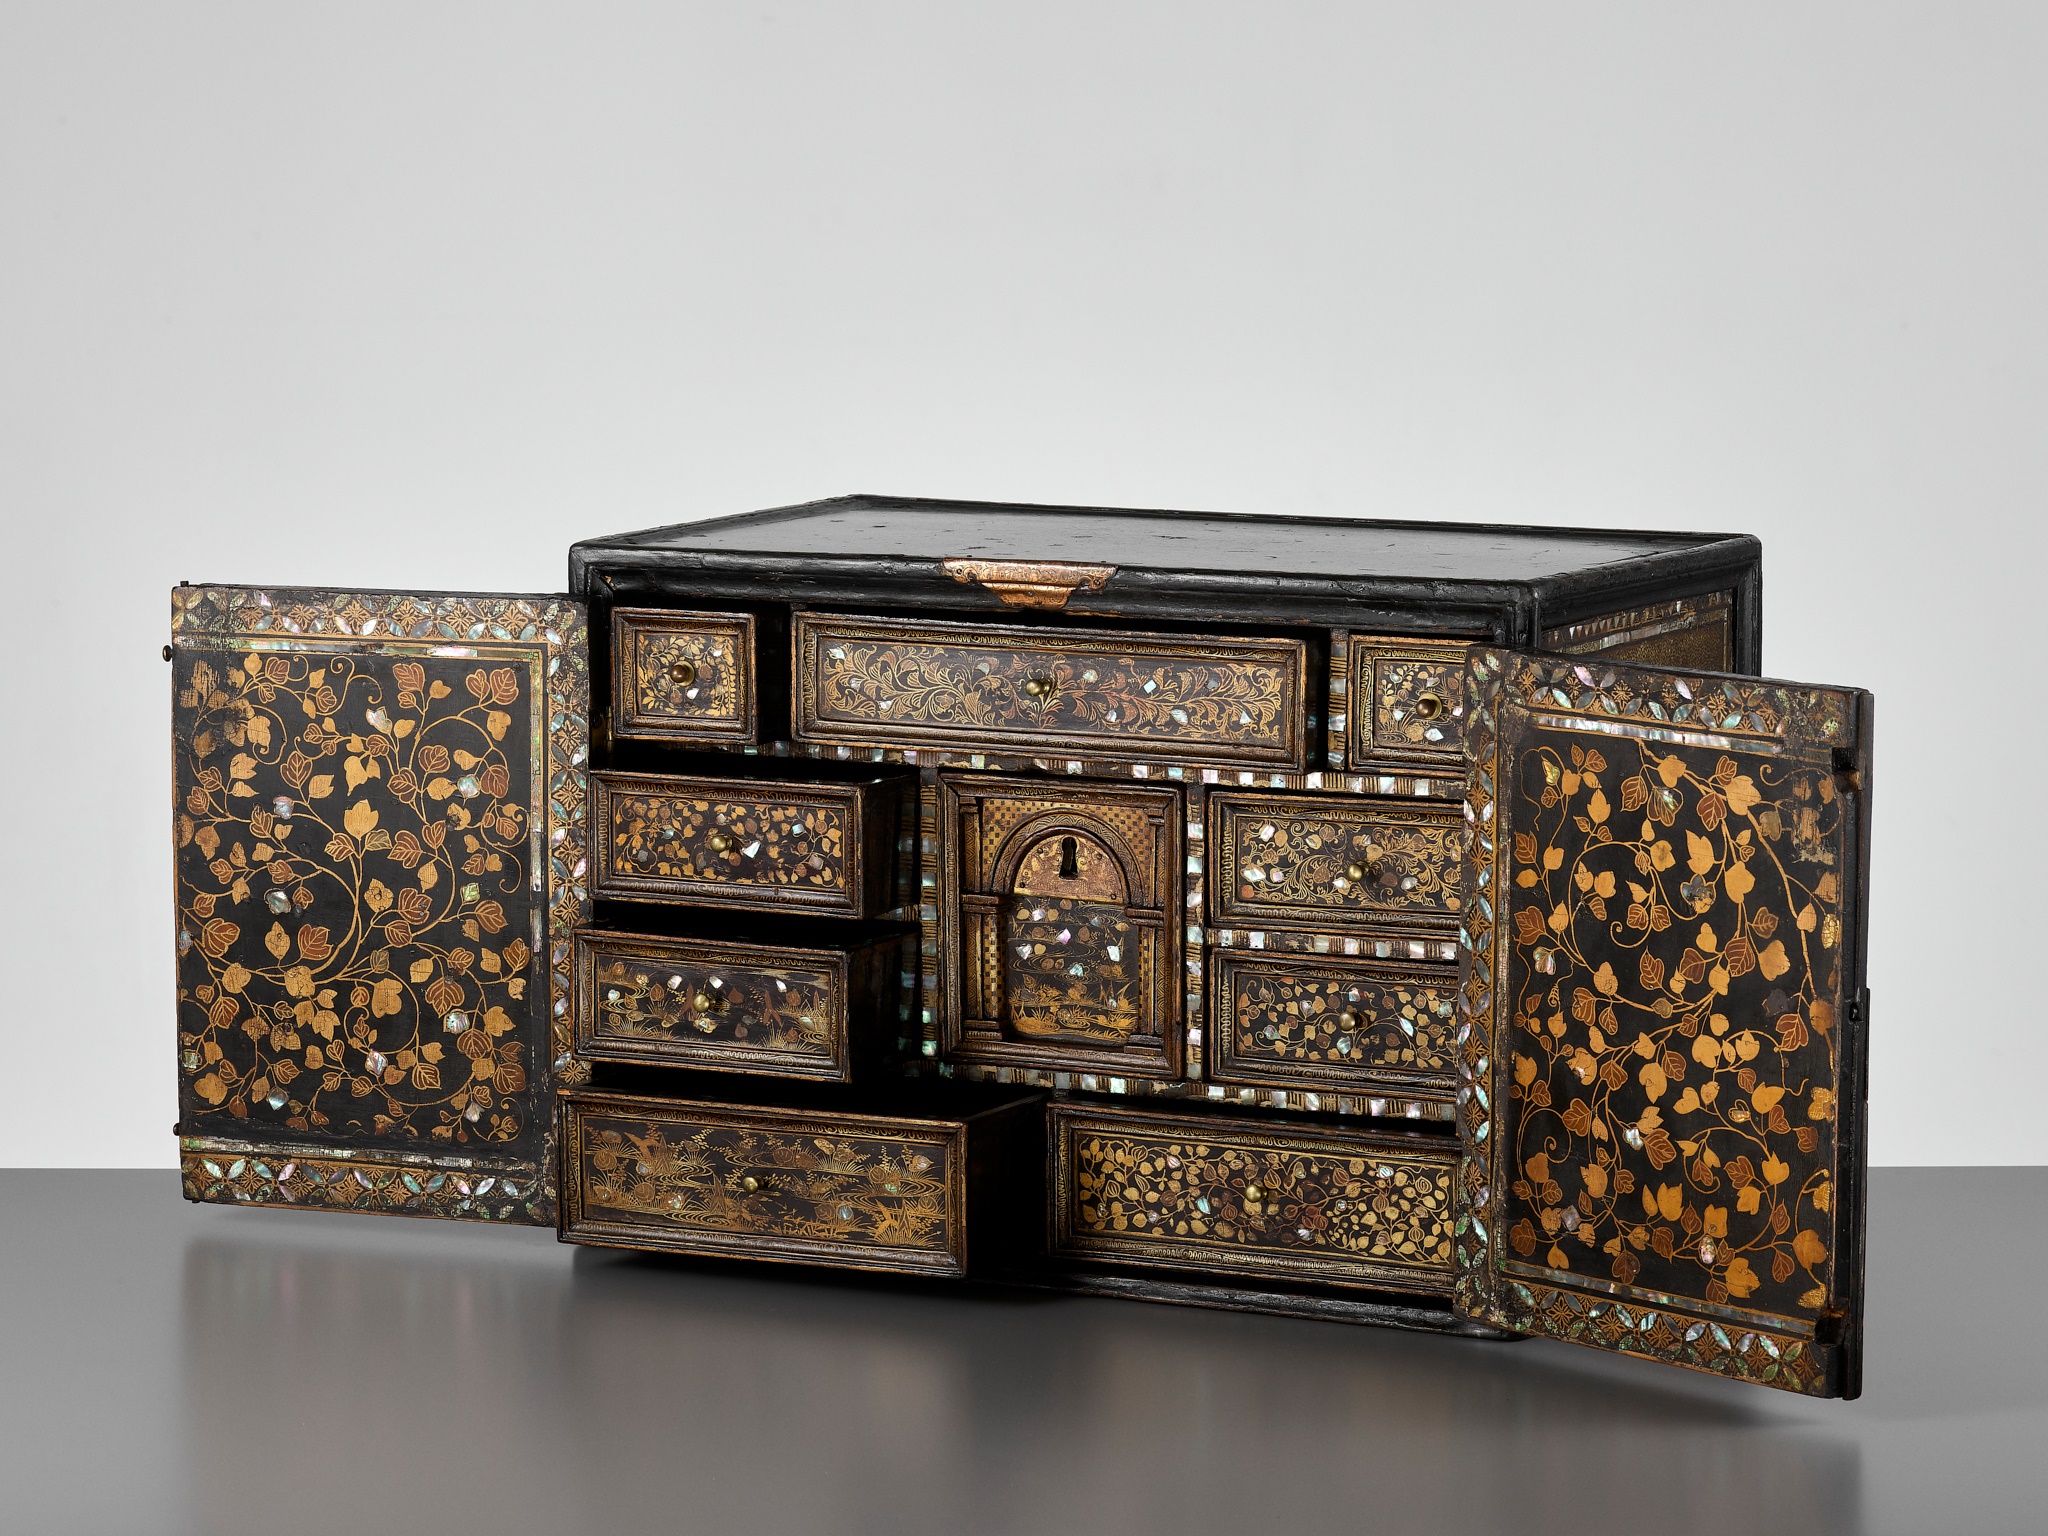 A RARE SHELL-INLAID NANBAN LACQUER CABINET - Image 7 of 14